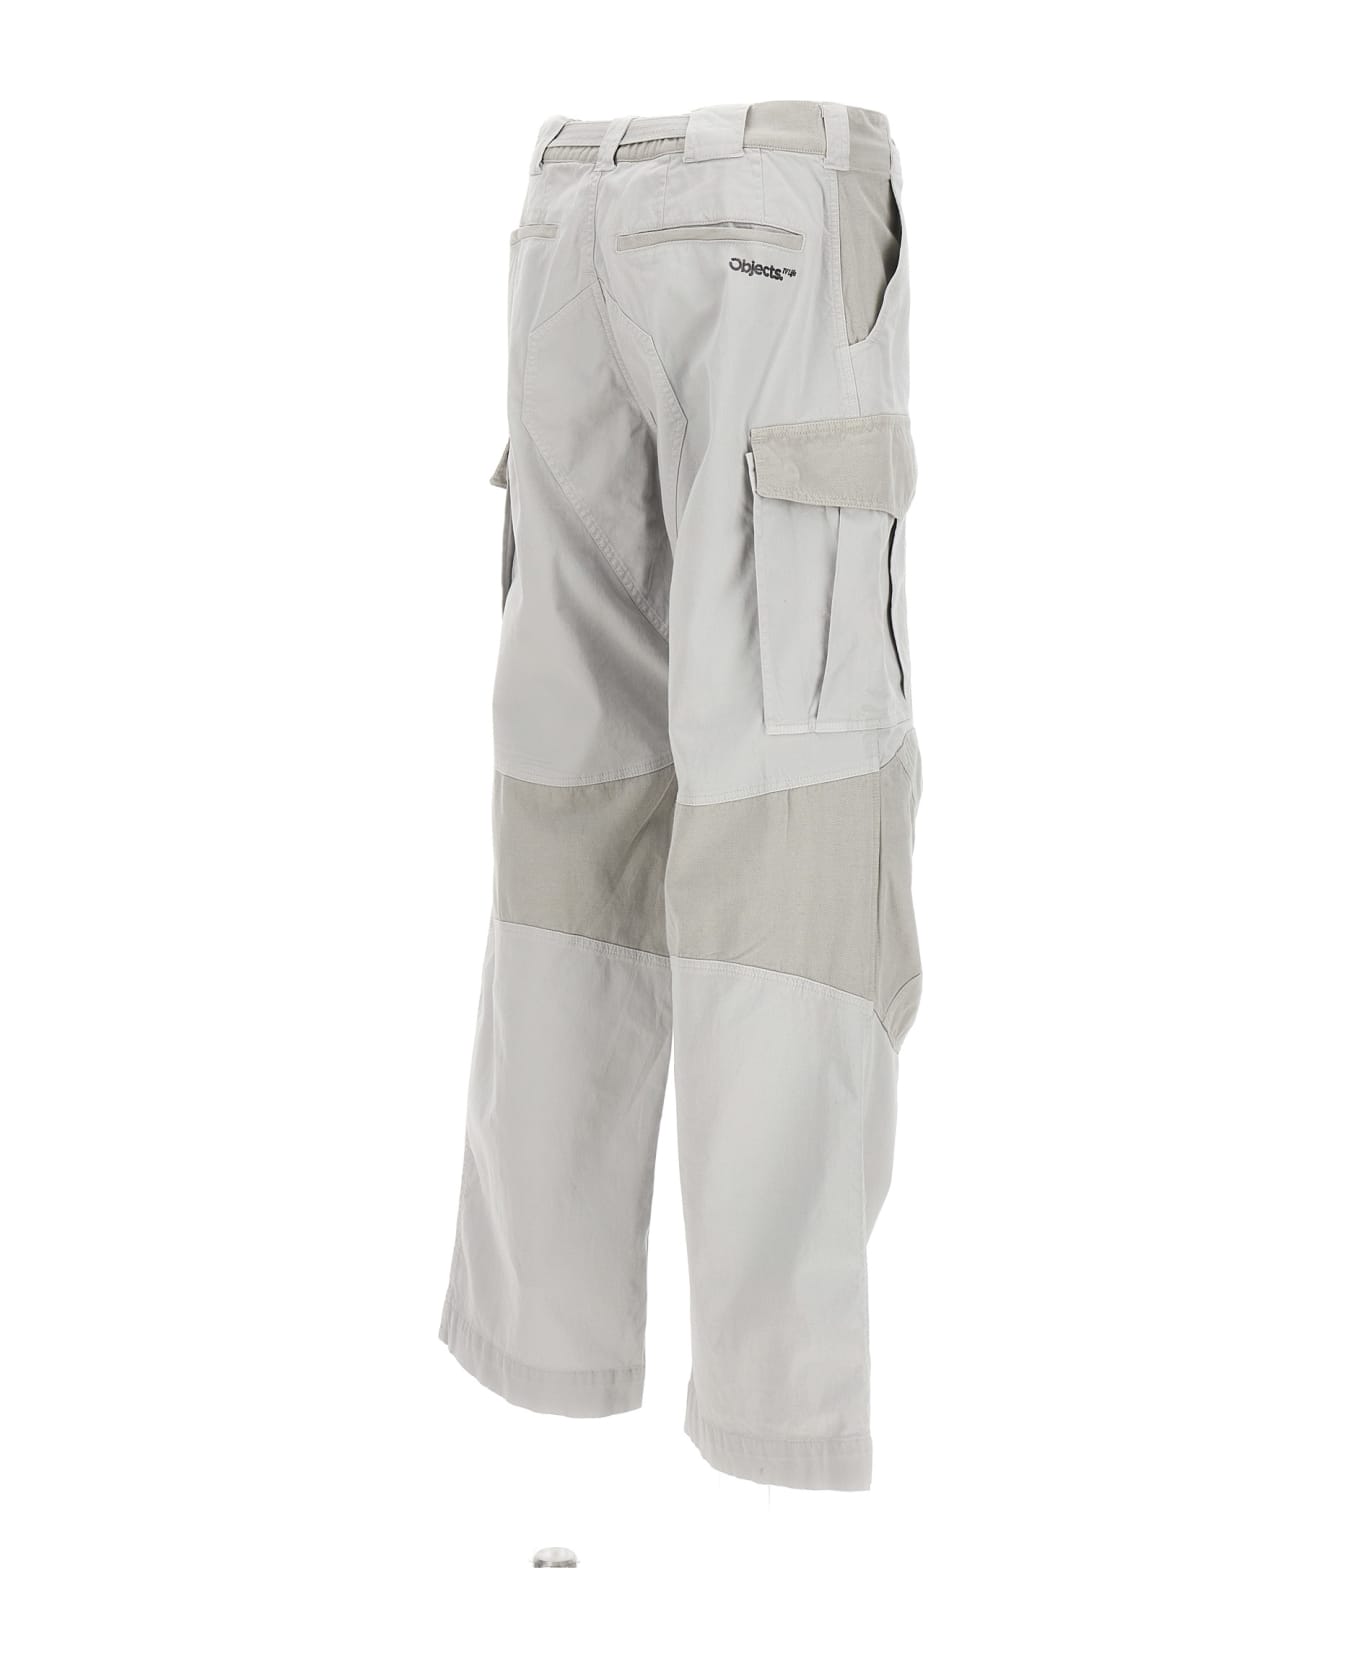 Objects Iv Life Cargo Pants - Gray